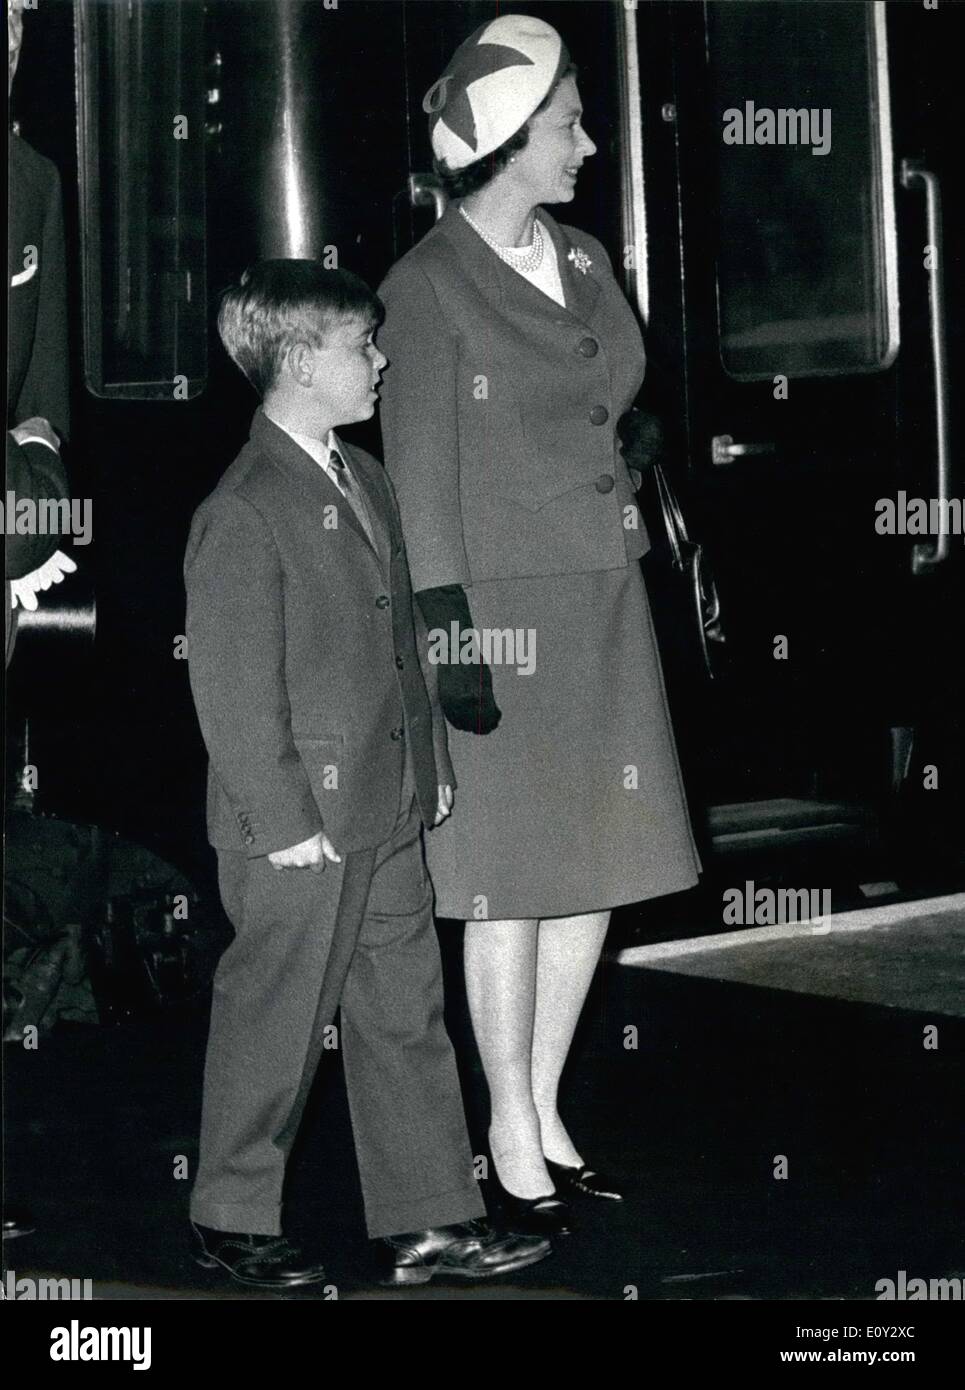 Sep. 09, 1968 - Royals arrive in London. Prince Andrew's first long Trouser suit.: The Queen and the Duke of Ediburgh who interrupted their Balmoral holiday to take eight-year-old Prince Andrew to join Heatherdown preparatory school, Ascot, as a boarder, arrived at King's Cross Station this morning. Photo shows H.M. The Queen and Prince Andrew wearing his first suit with long trousers on arrival at King's Cross Station today. Stock Photo